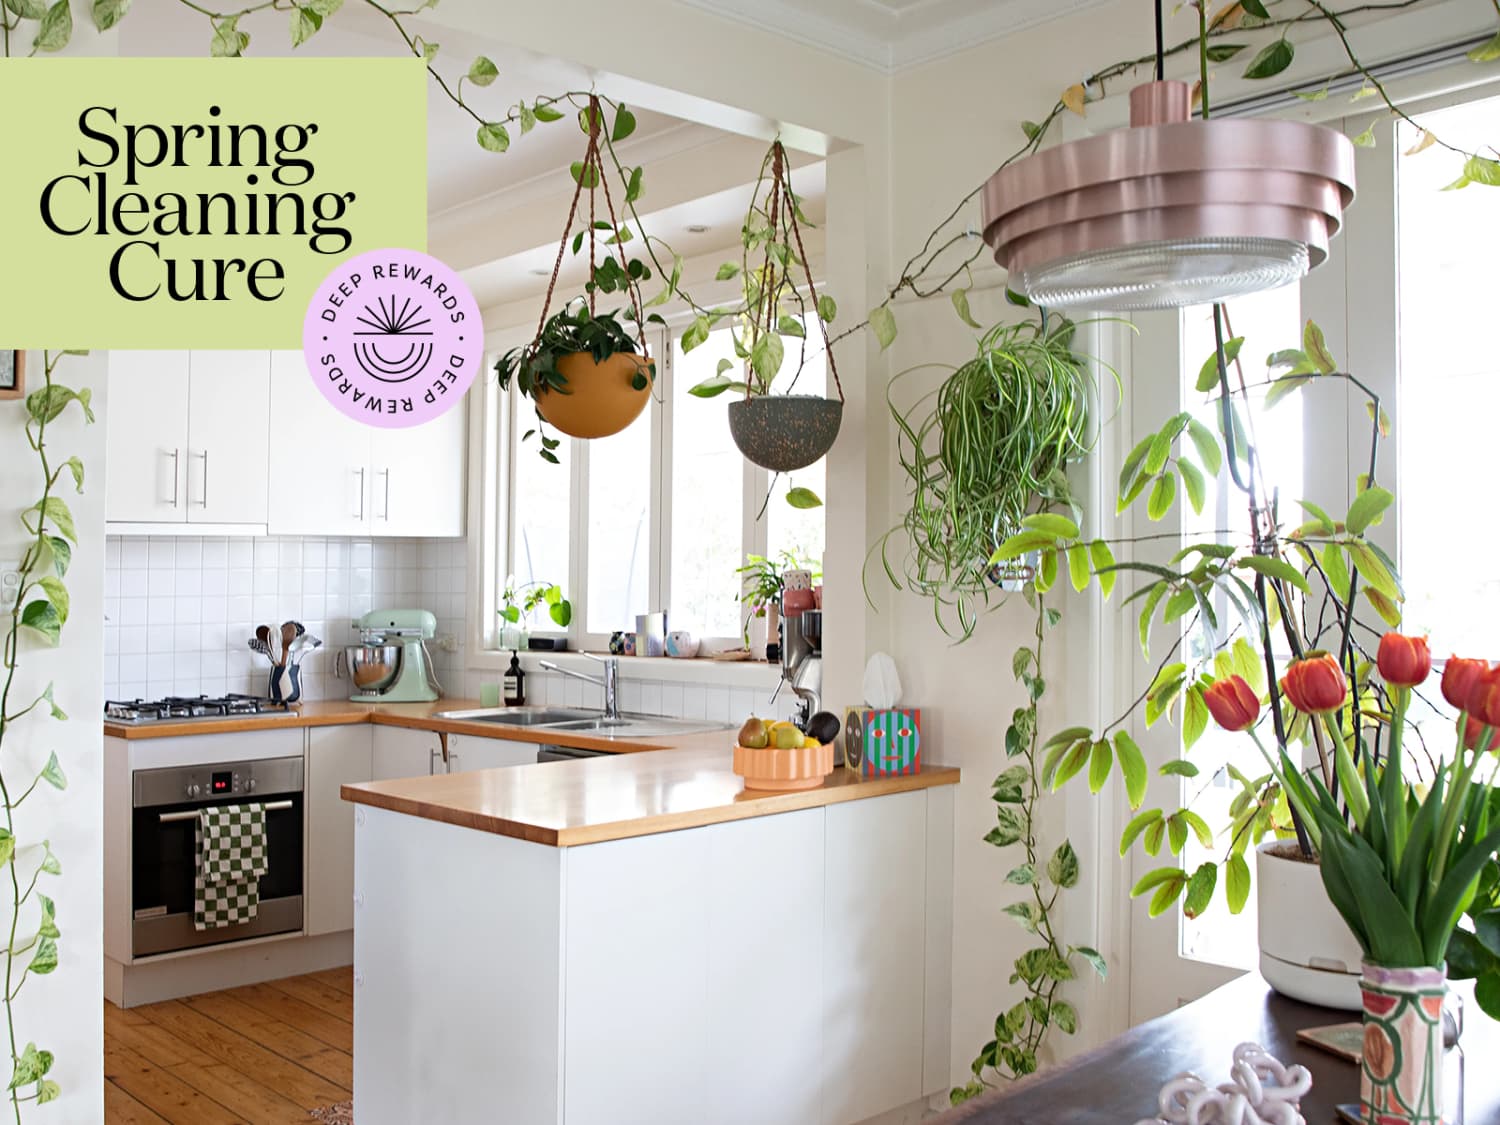 Spring Cleaning: Ten Must-Have Tips! - Driven by Decor